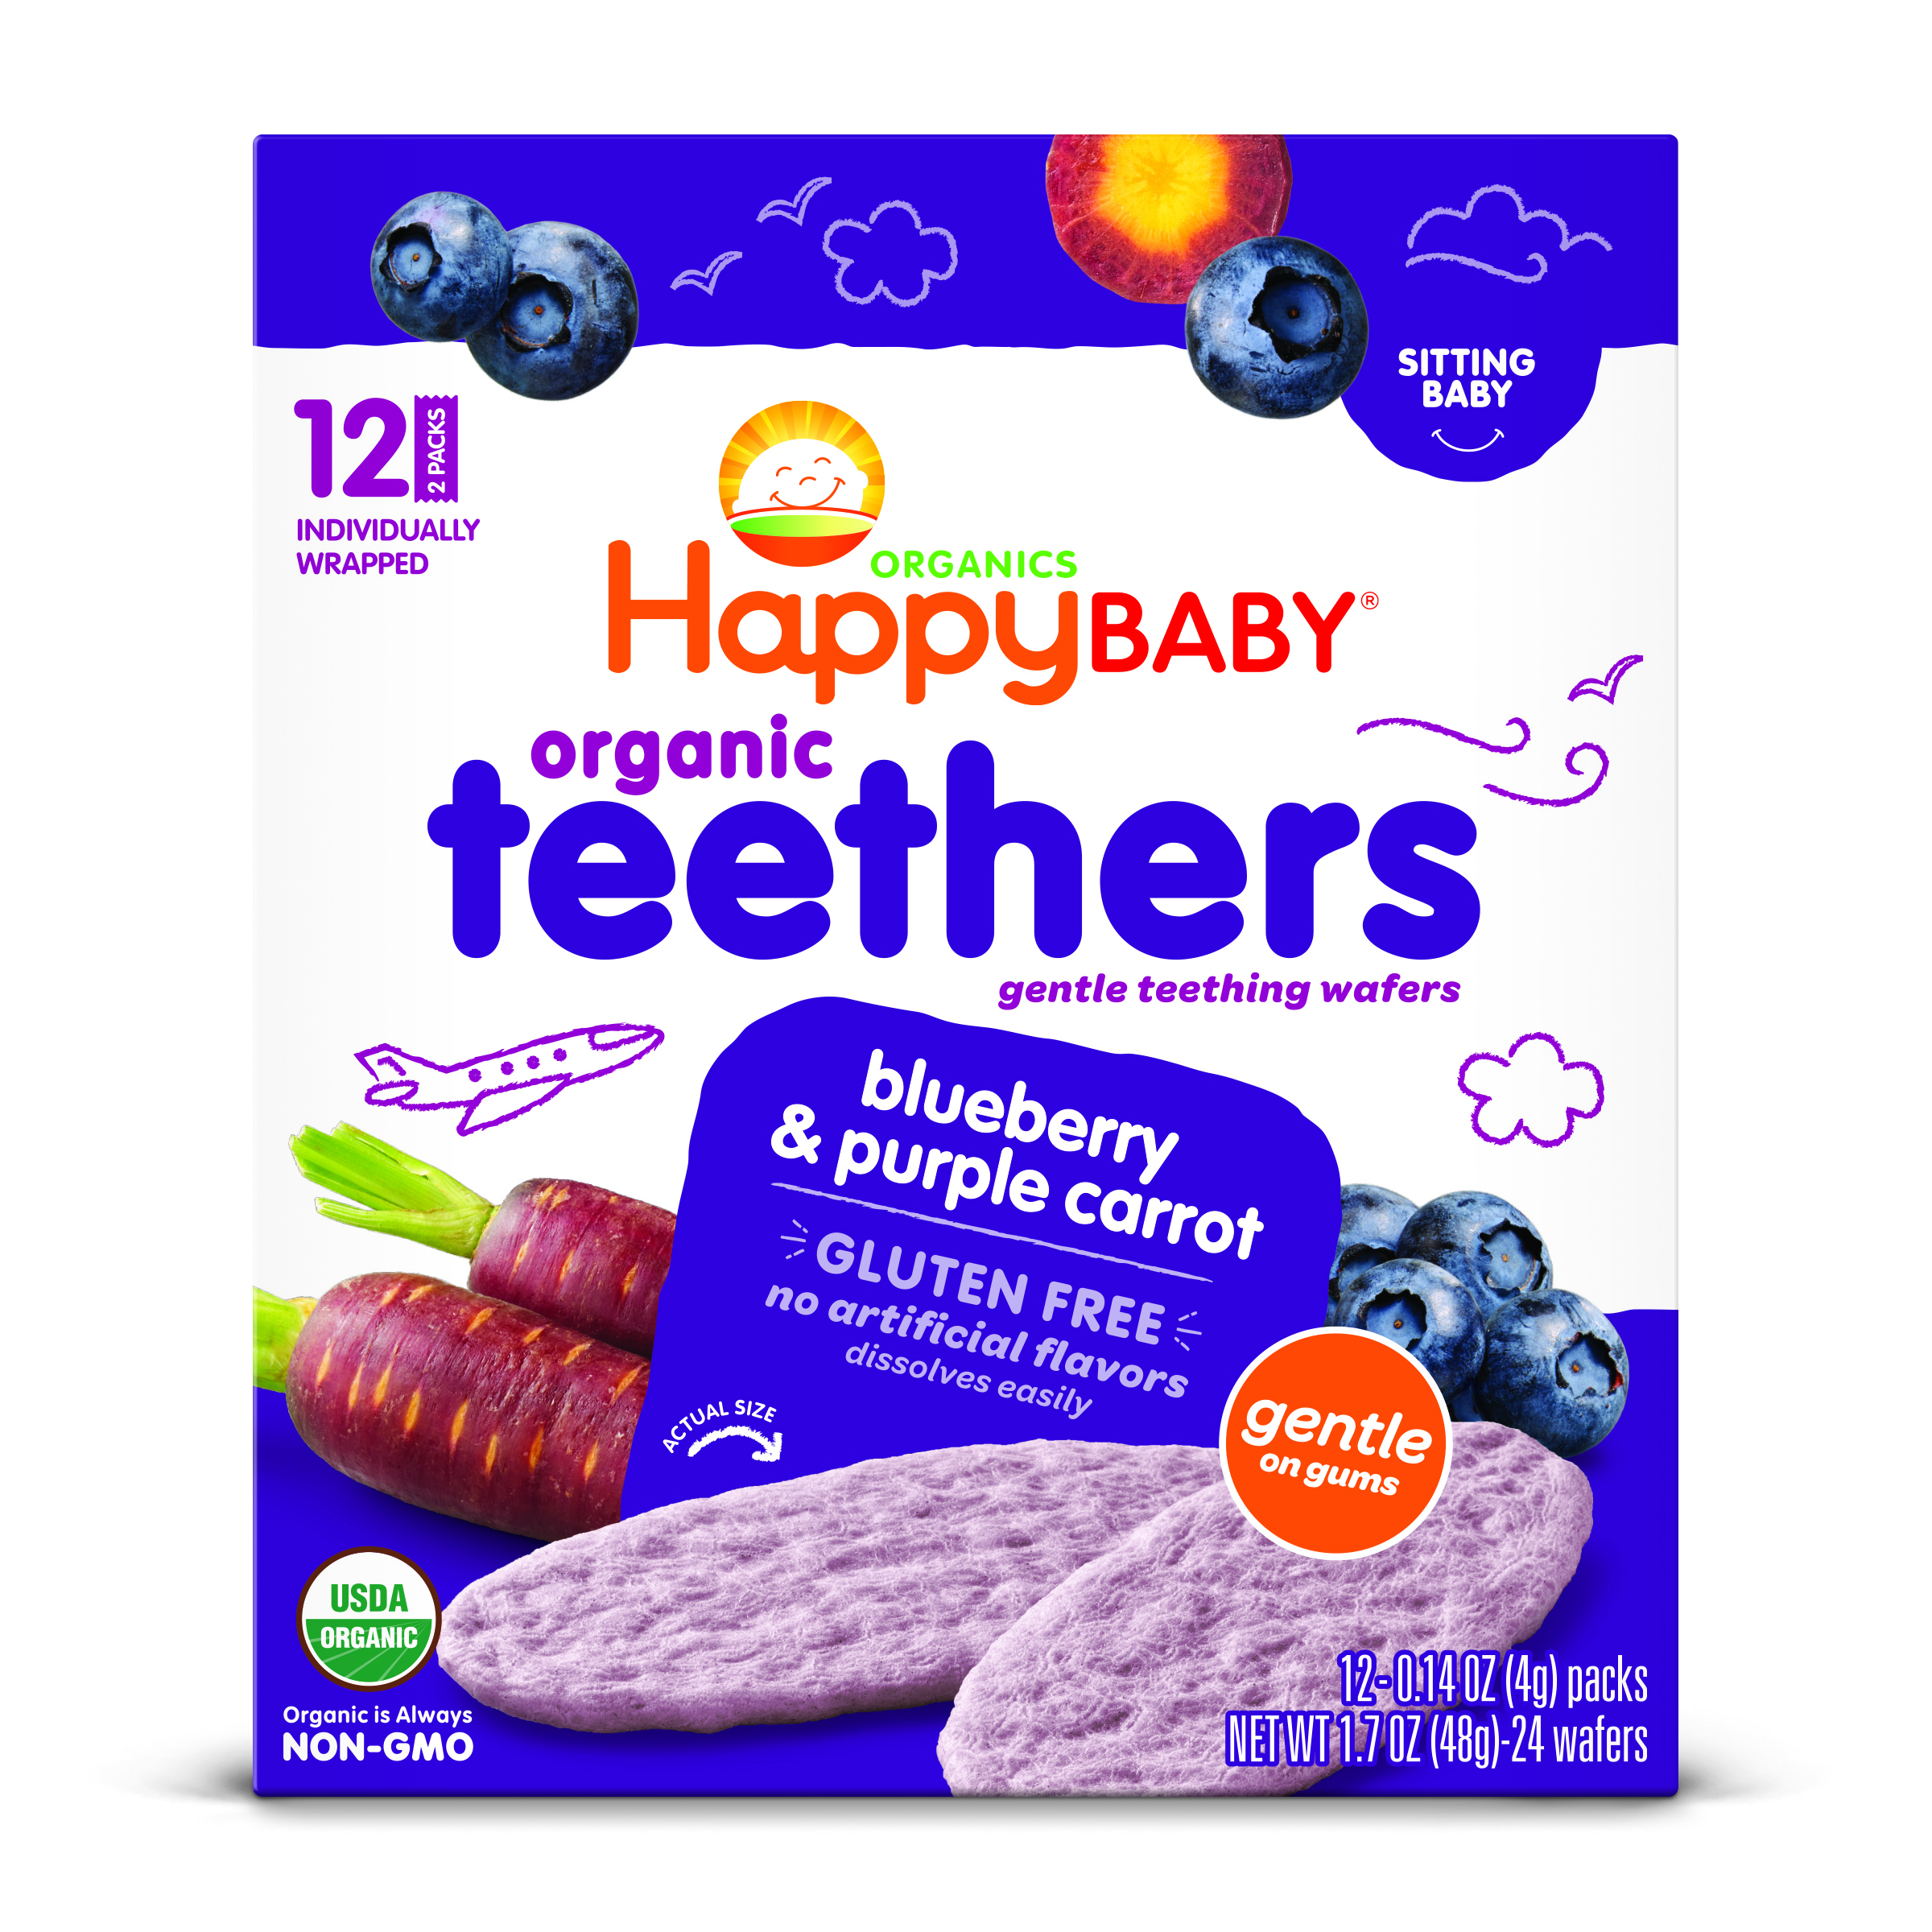 Happy Baby Blueberry & Purple Carrot Teethers 6 units per case 1.7 oz